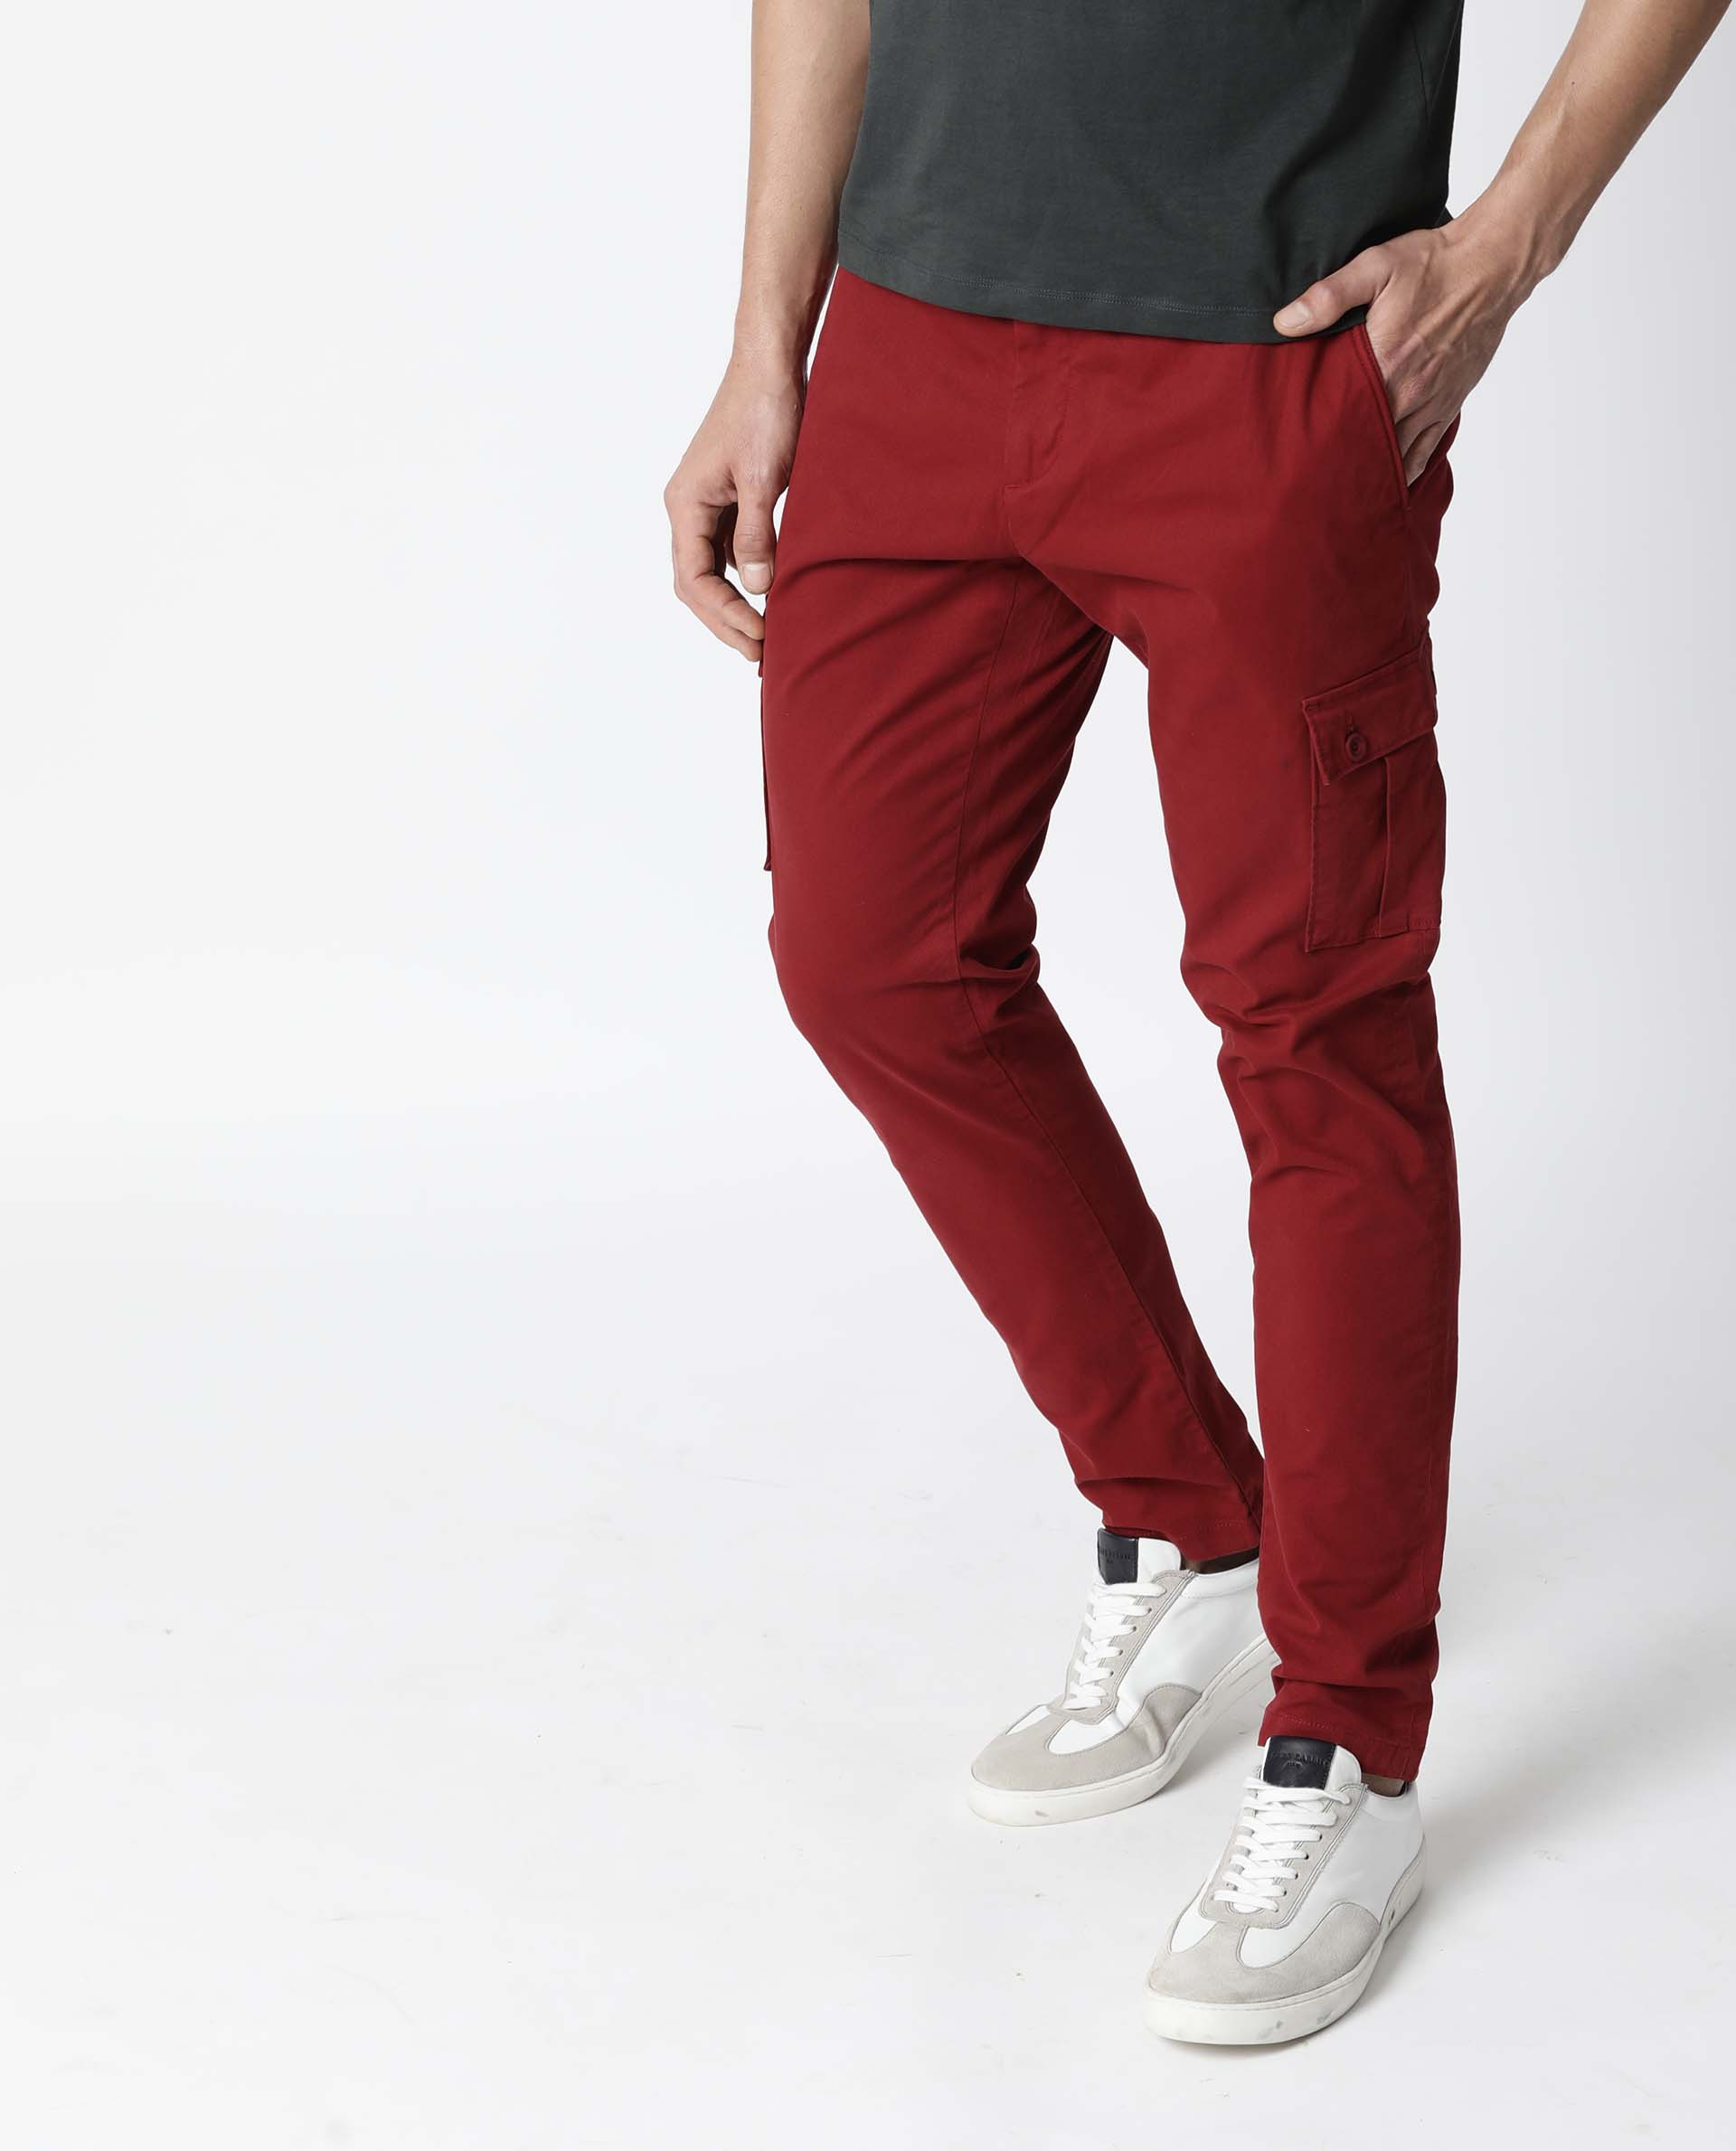 Buy Red Trousers  Pants for Women by BUYNEWTREND Online  Ajiocom